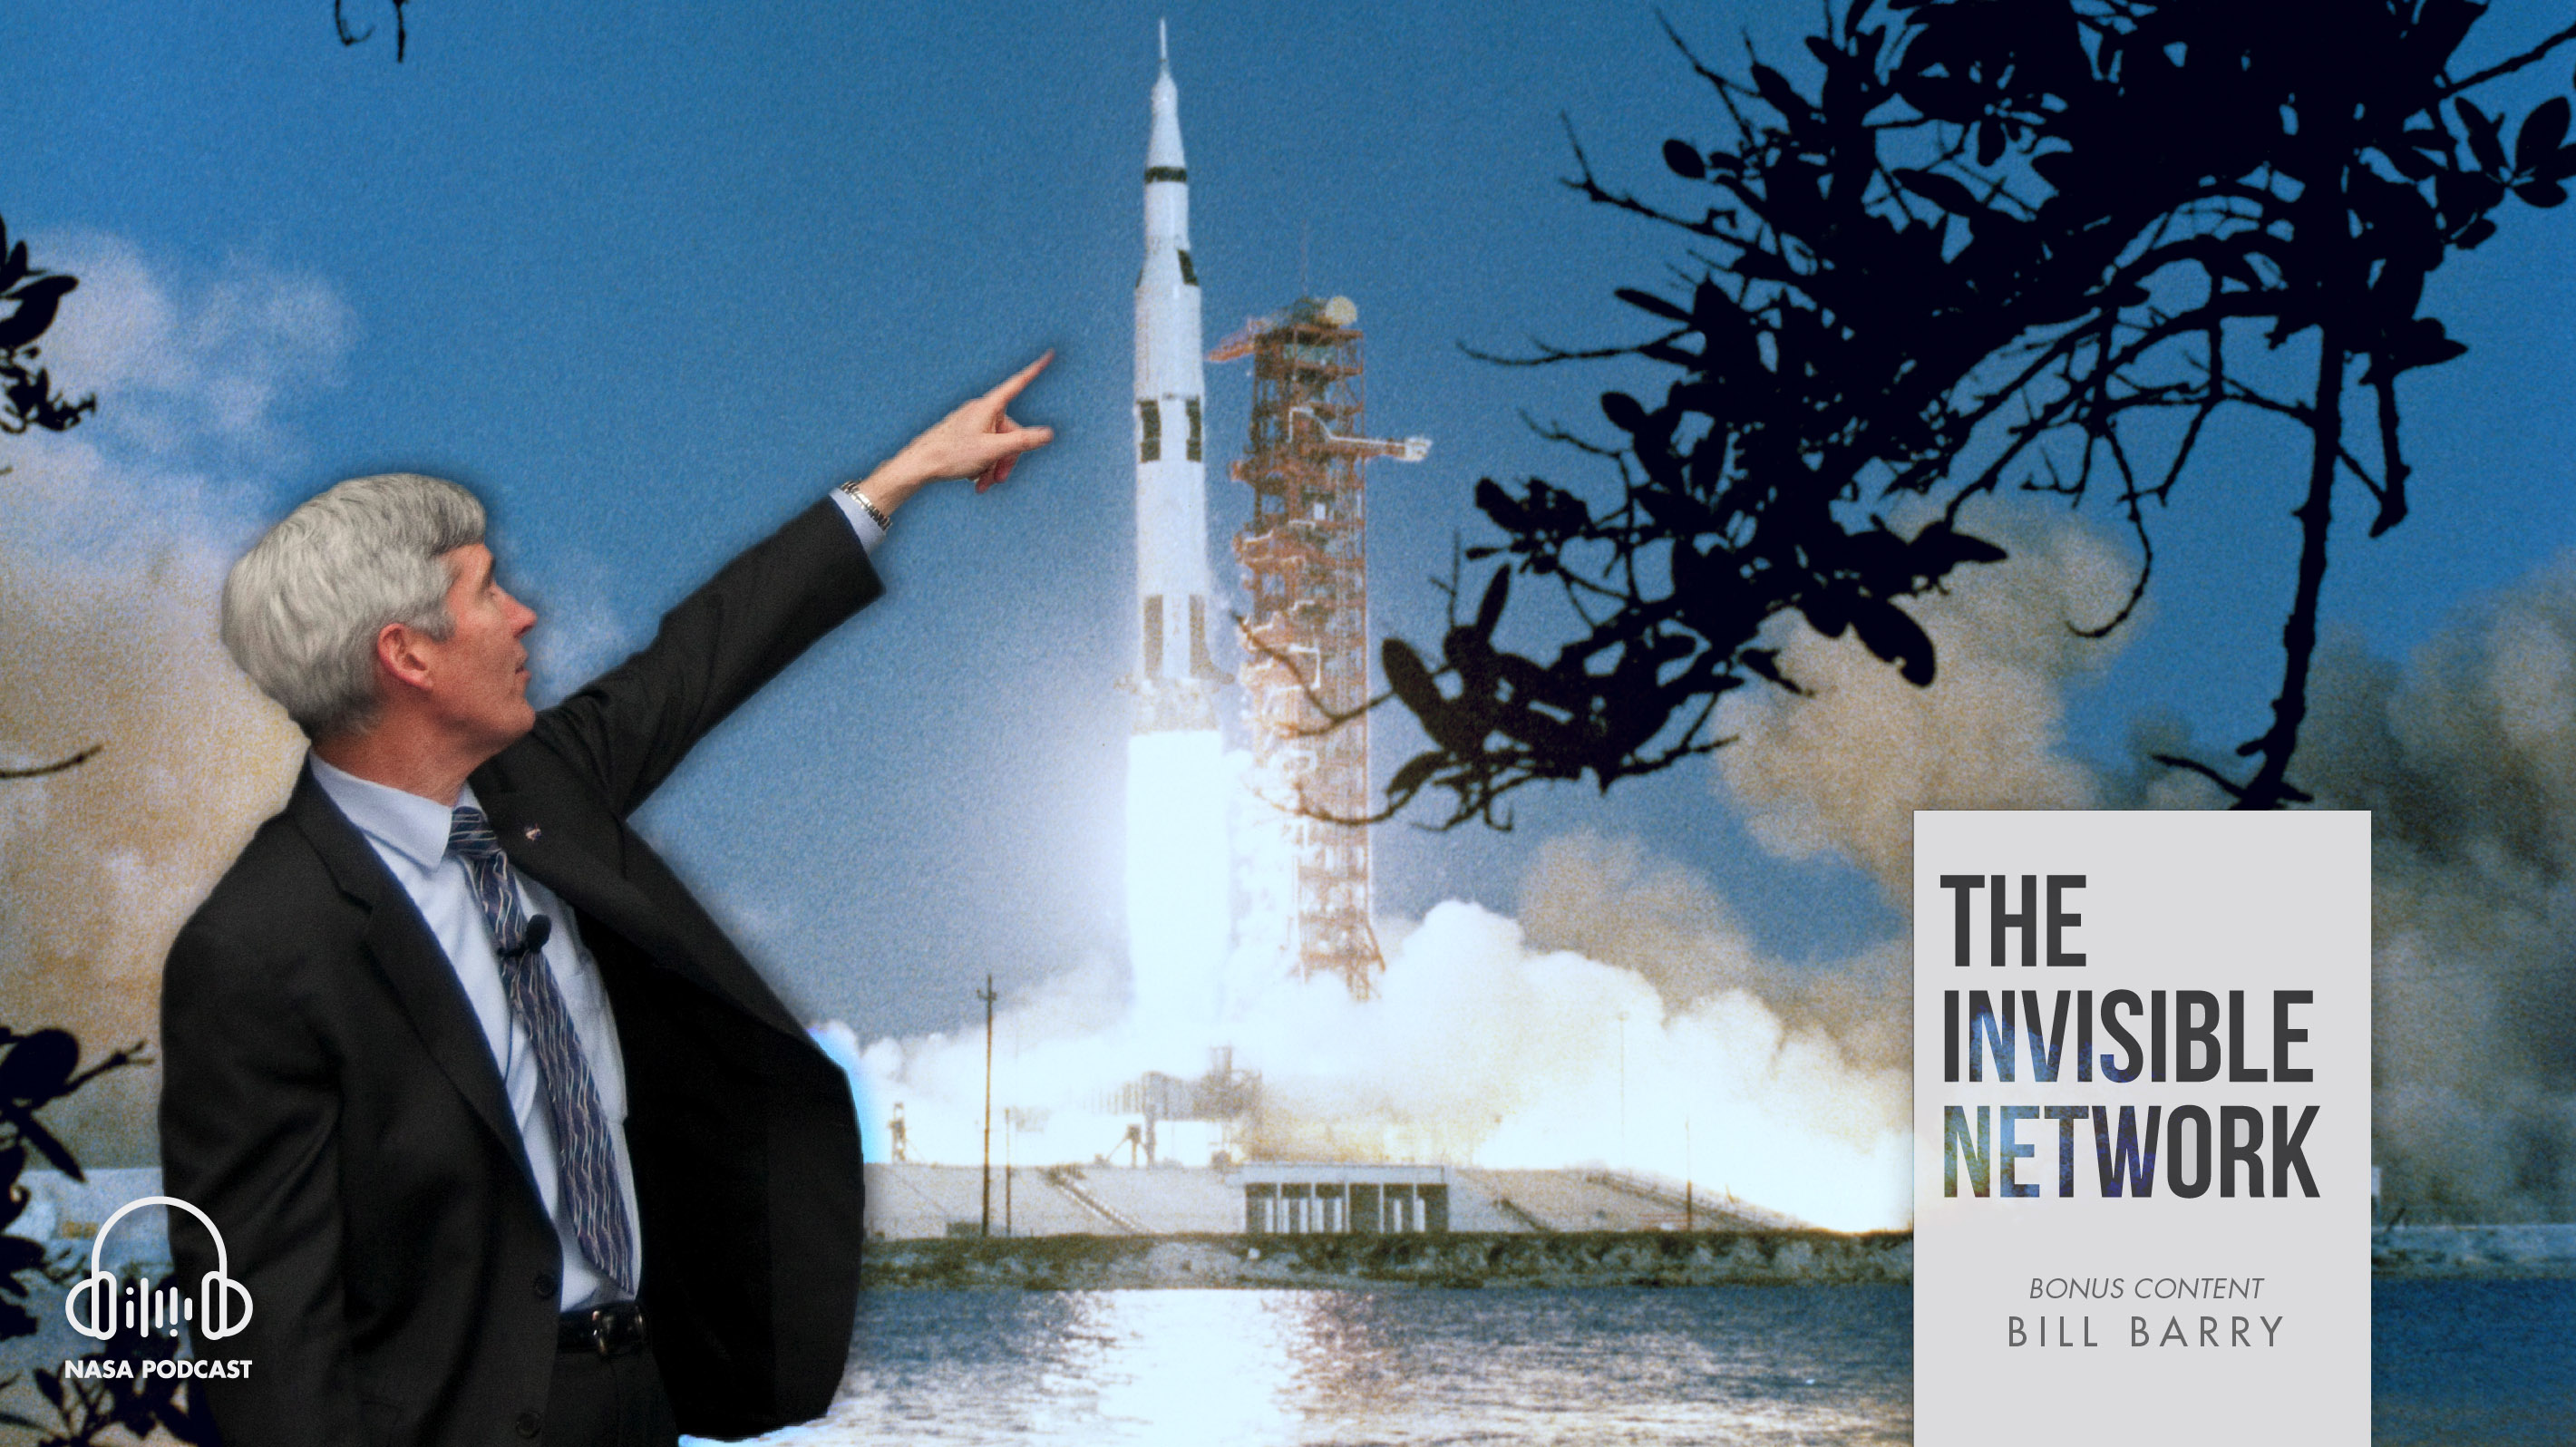 composite image of Bill Barry pointing at a rocket launch